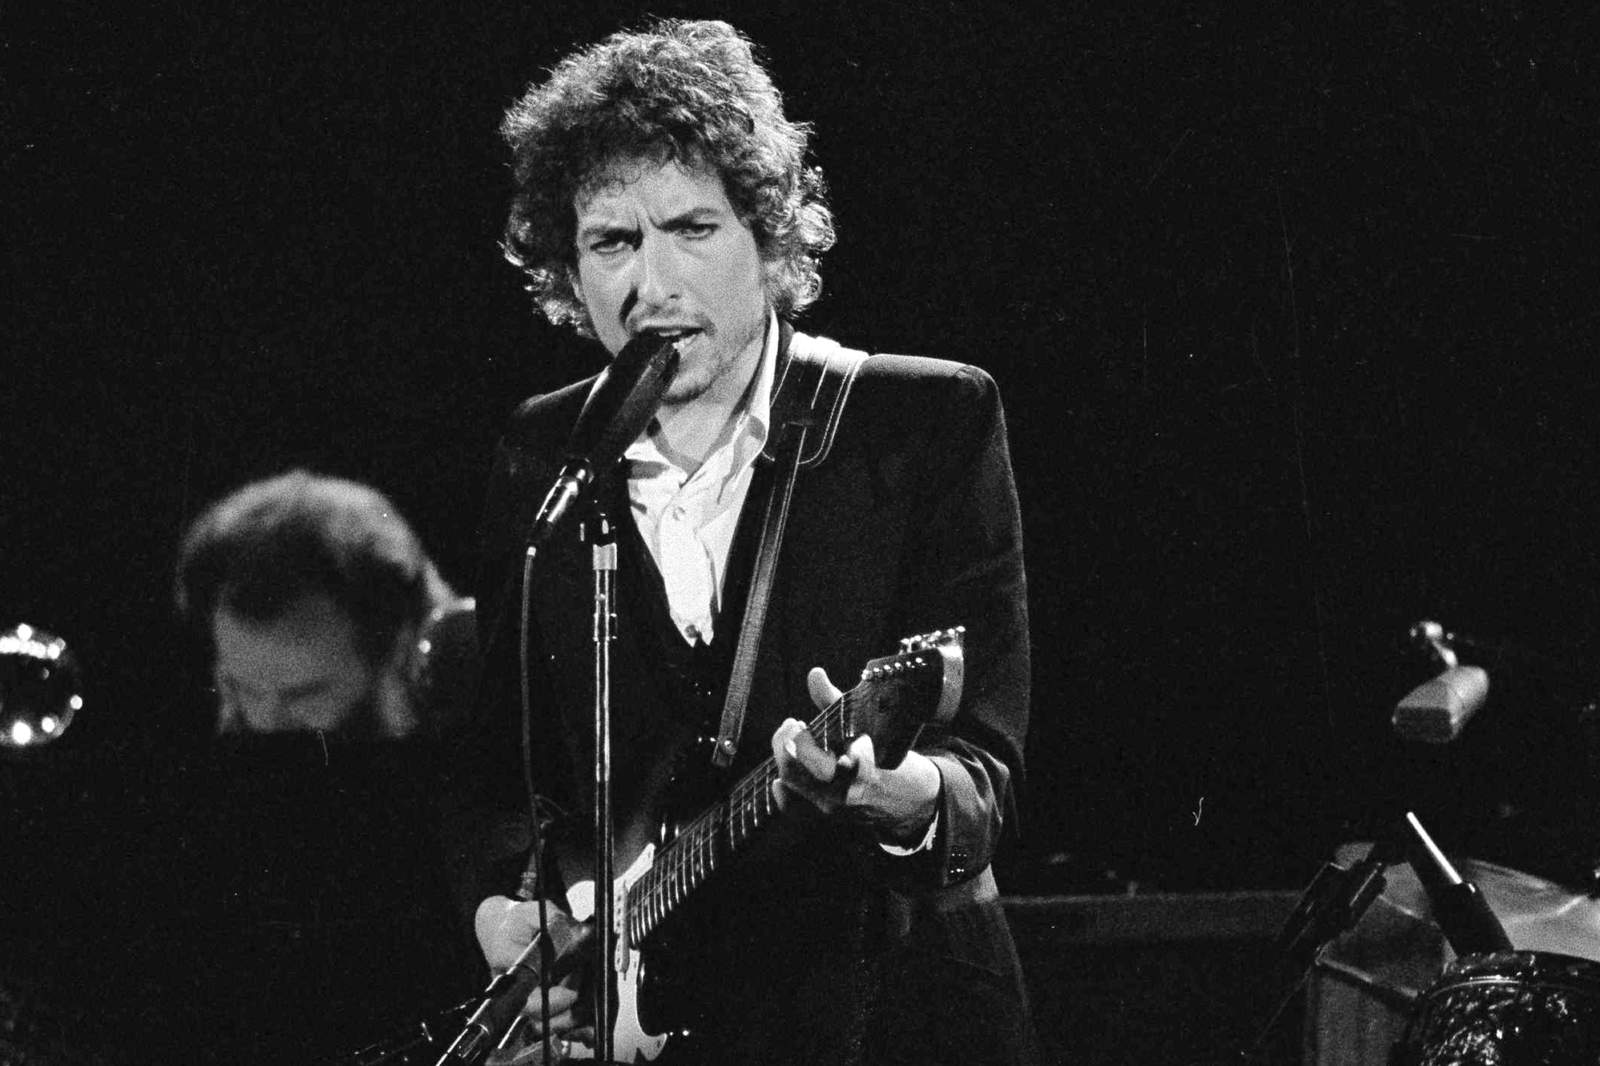 Blowin' in the wind: Lost interviews hold new Dylan insights